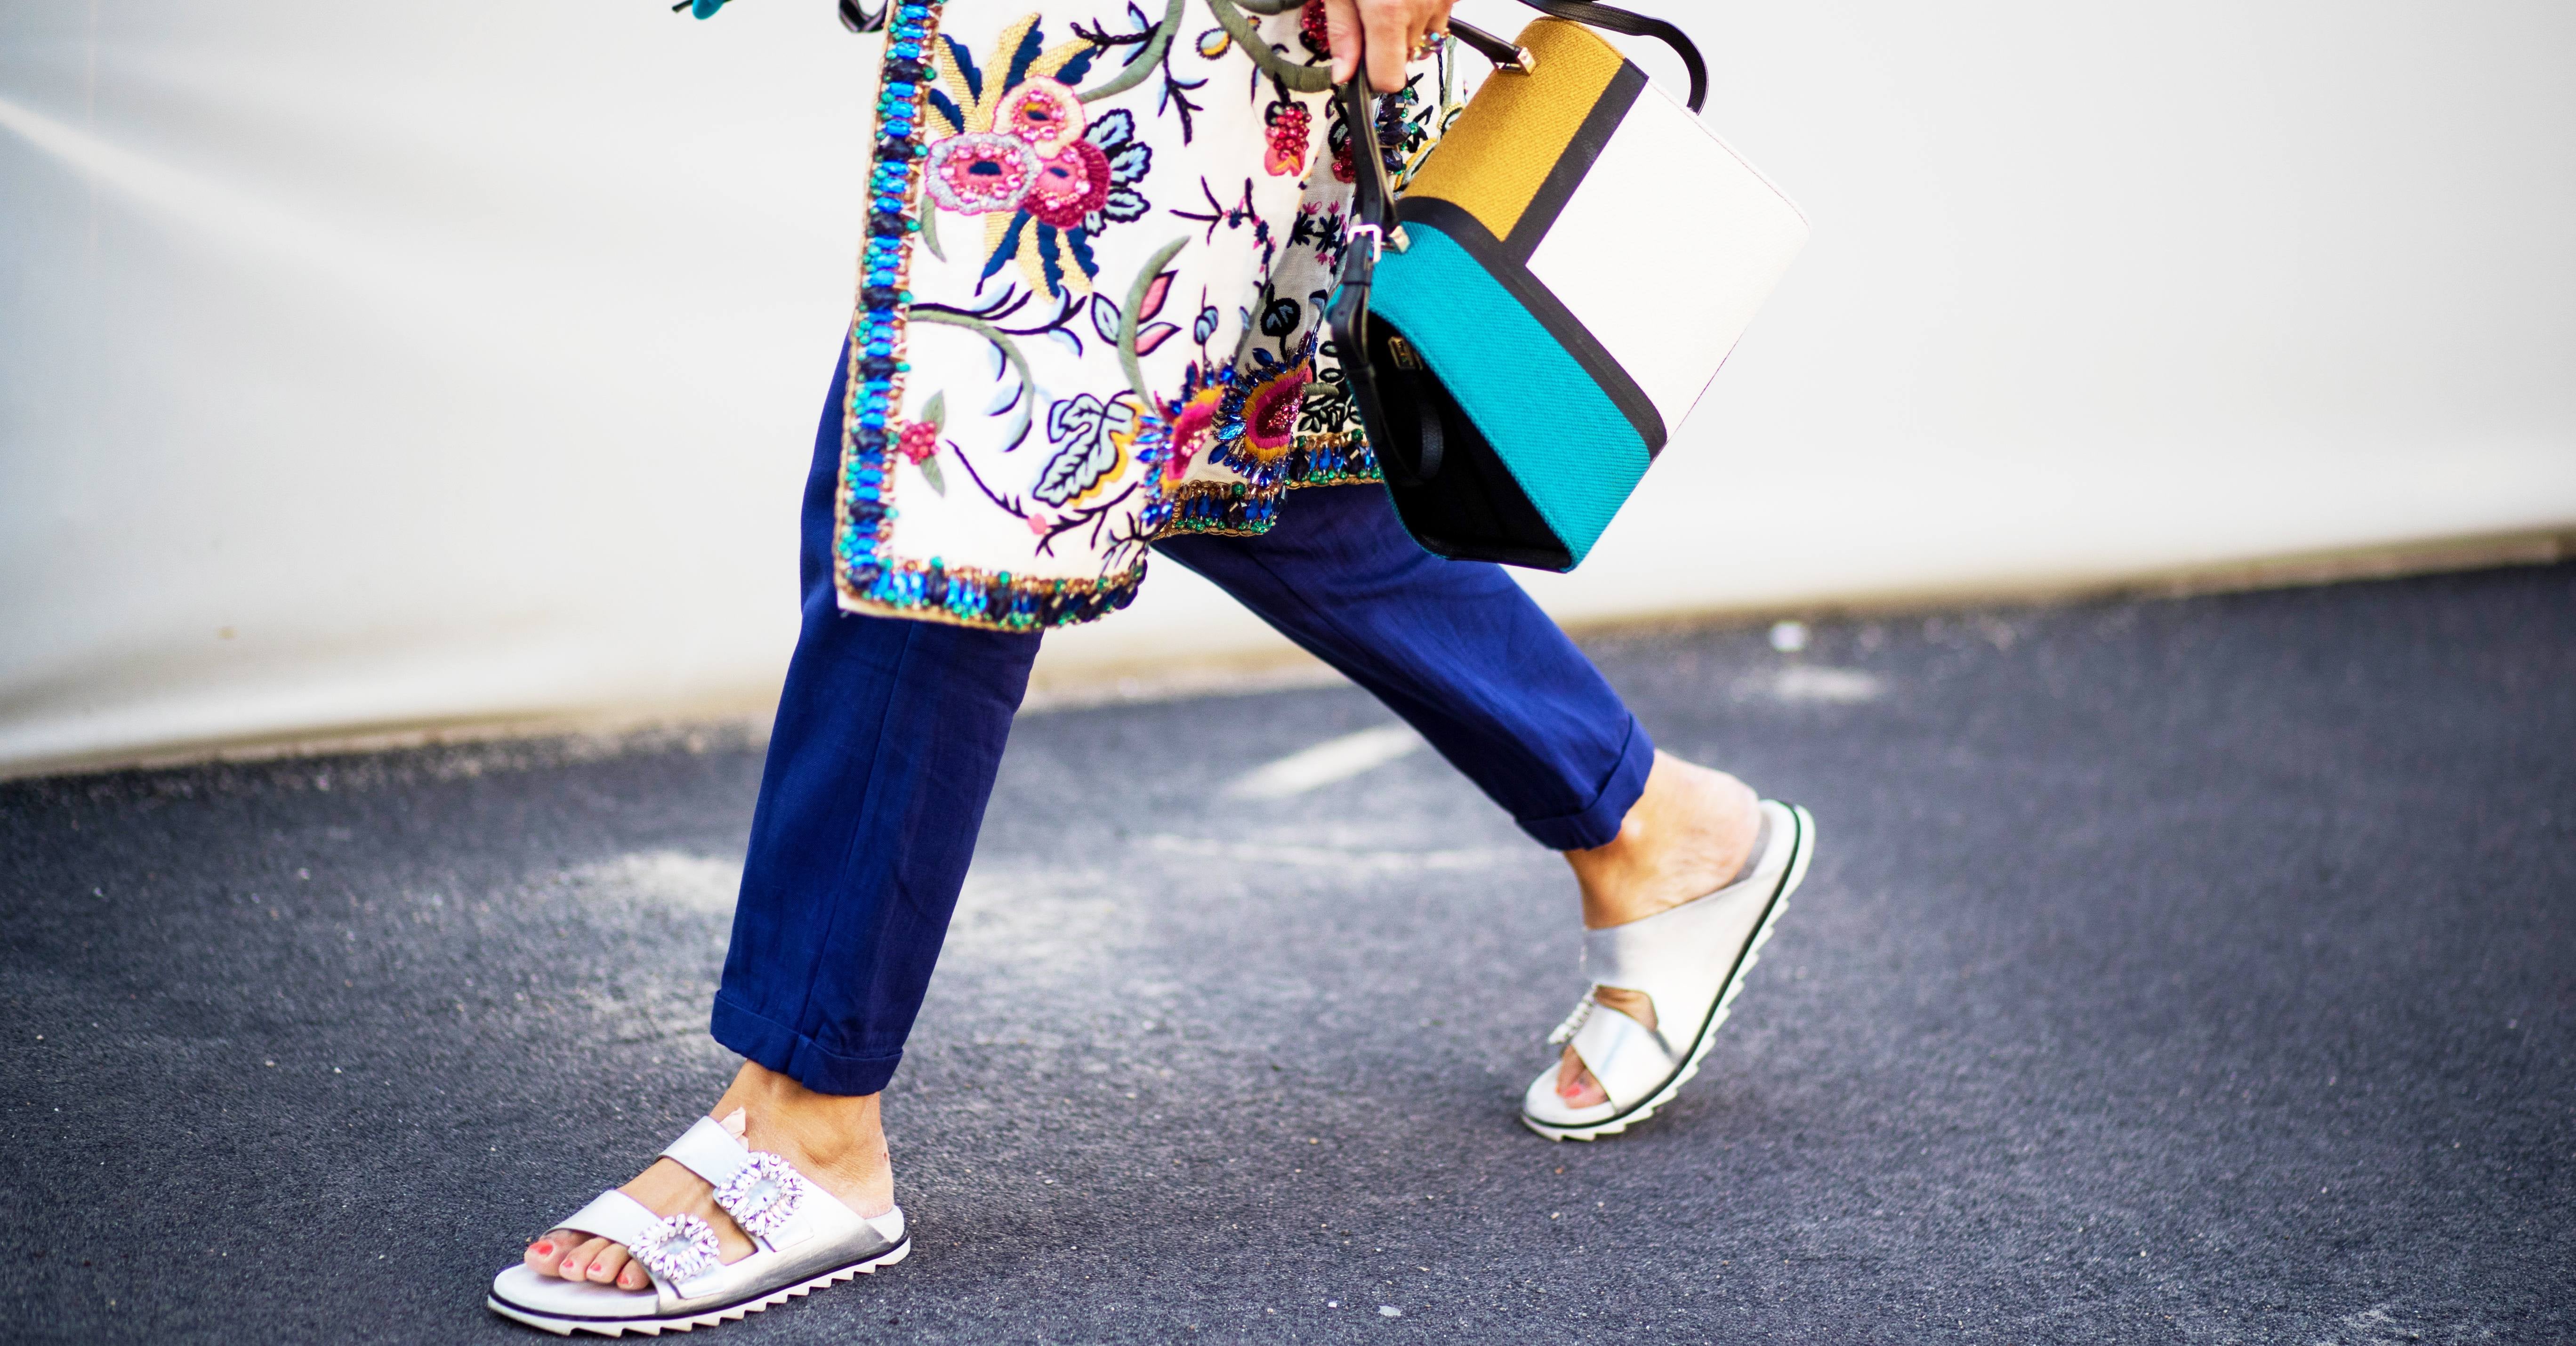 Why Are We So Obsessed With Ugly Shoes? Trend Explained